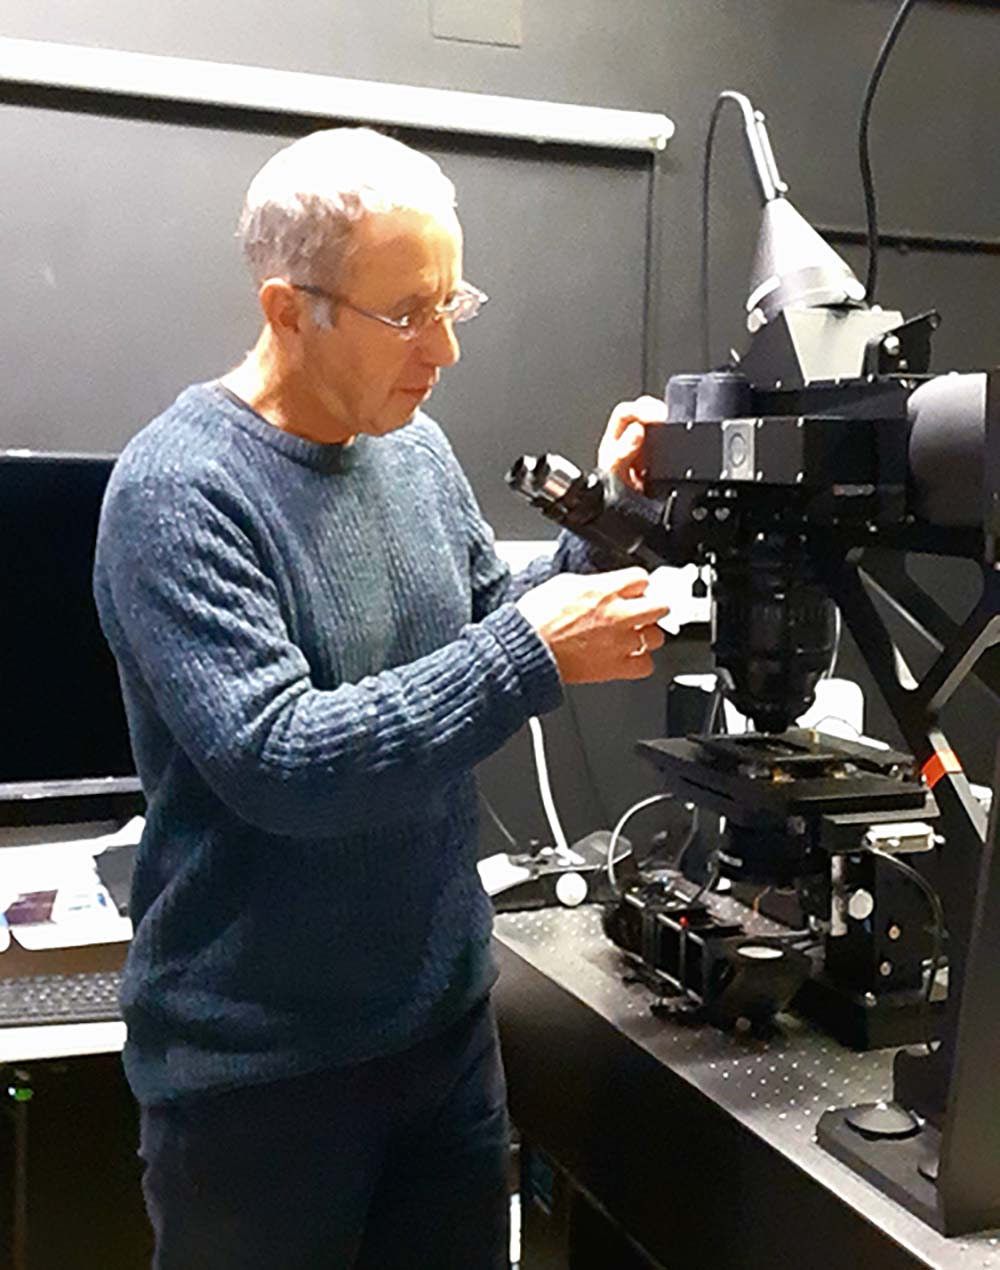 Colin Brownlee adjusting lenses on a Mesolens Microscope